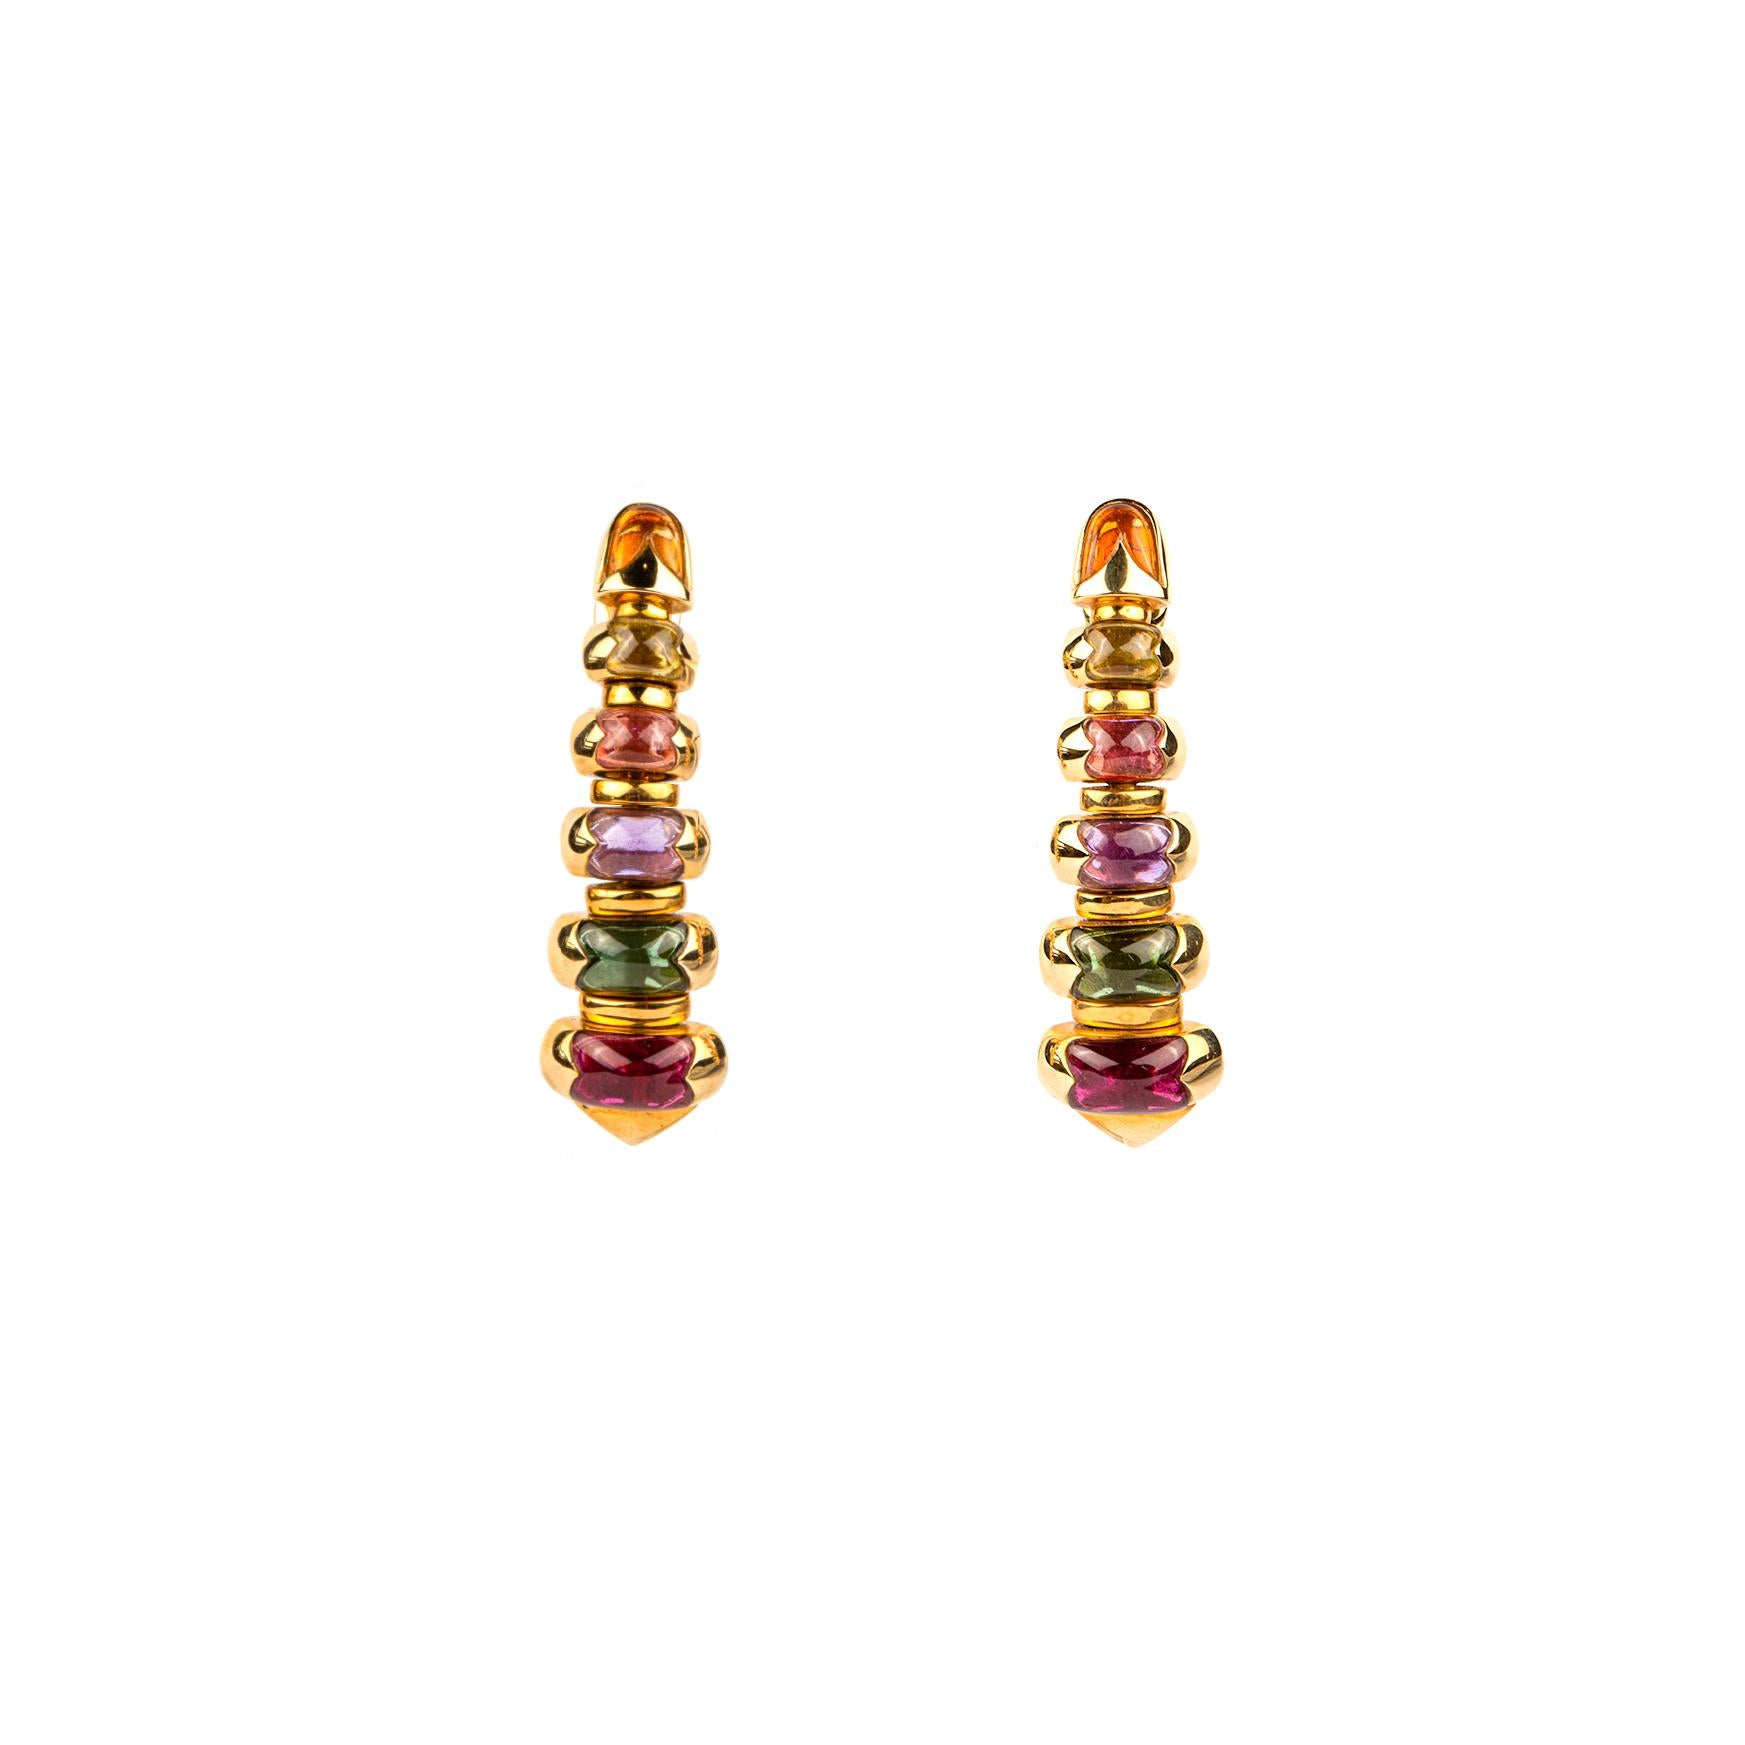 Bulgari ‘Celtaura’ Gold and Multi-Colored Gemstones Drop Earrings In Excellent Condition For Sale In New York, NY